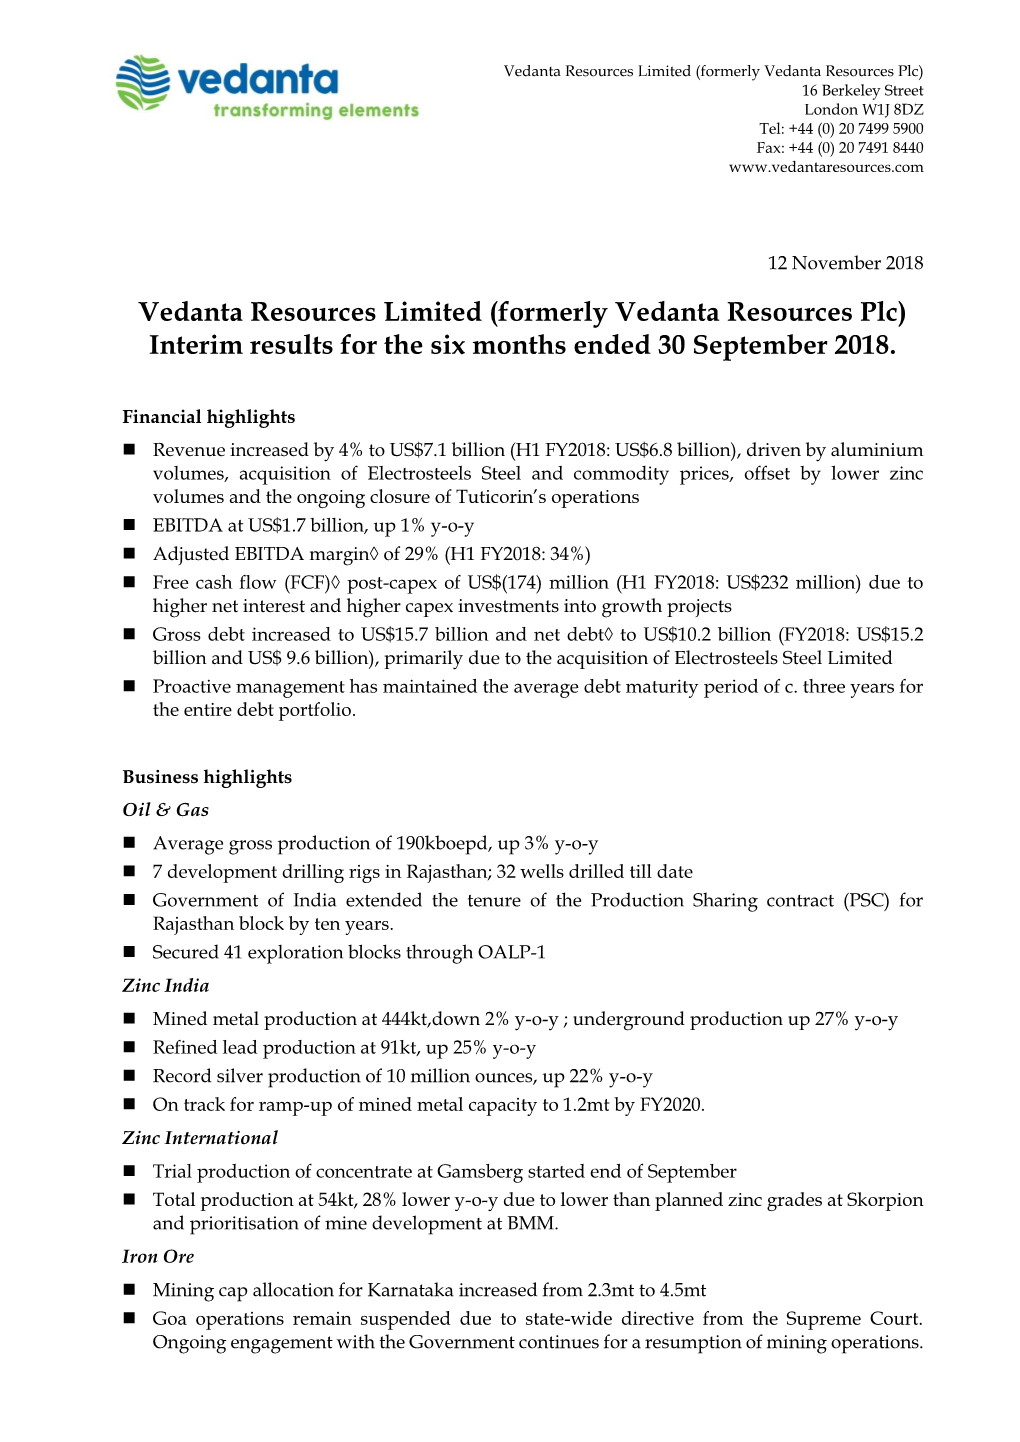 (Formerly Vedanta Resources Plc) Interim Results for the Six Months Ended 30 September 2018